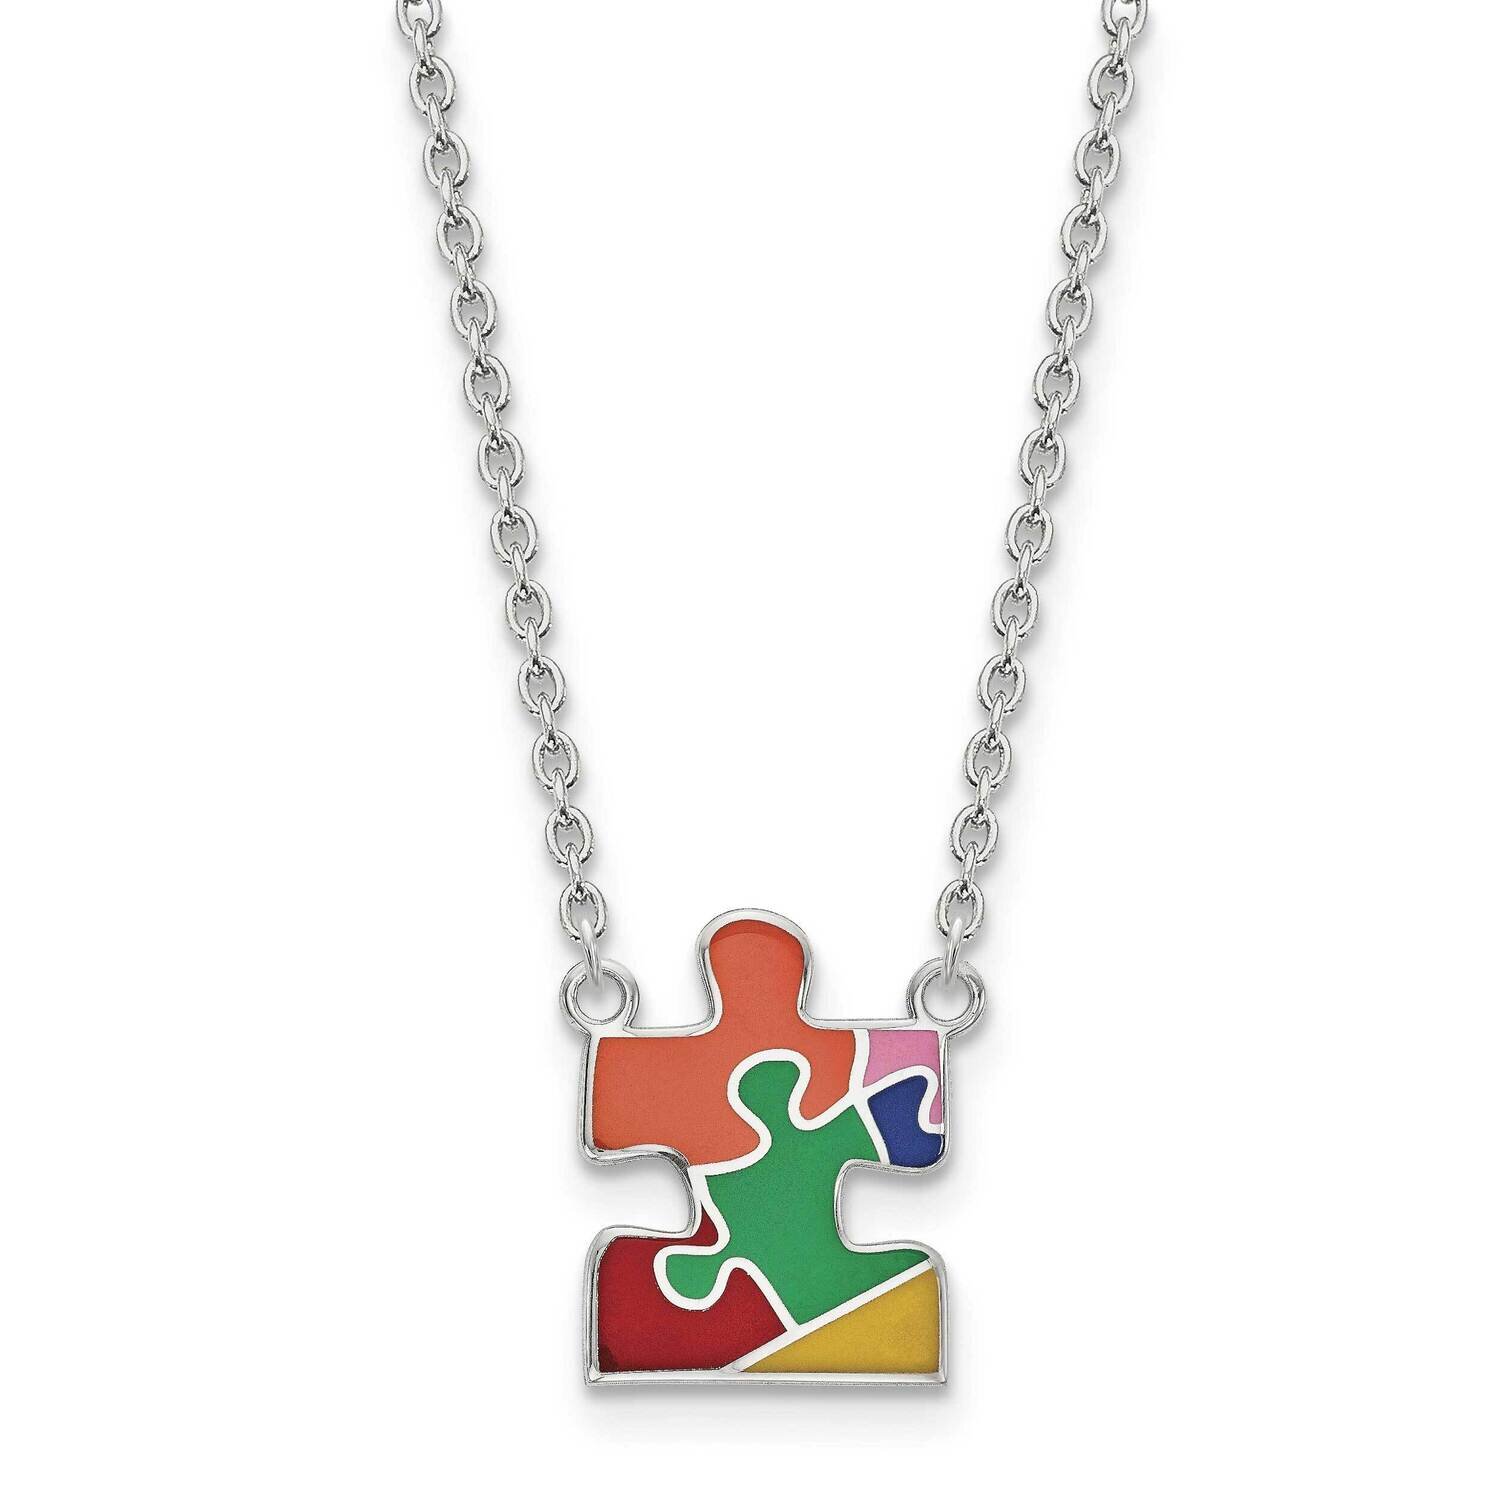 Enameled Autism Puzzle Piece Necklace Sterling Silver Rhodium-Plated QG4676-18